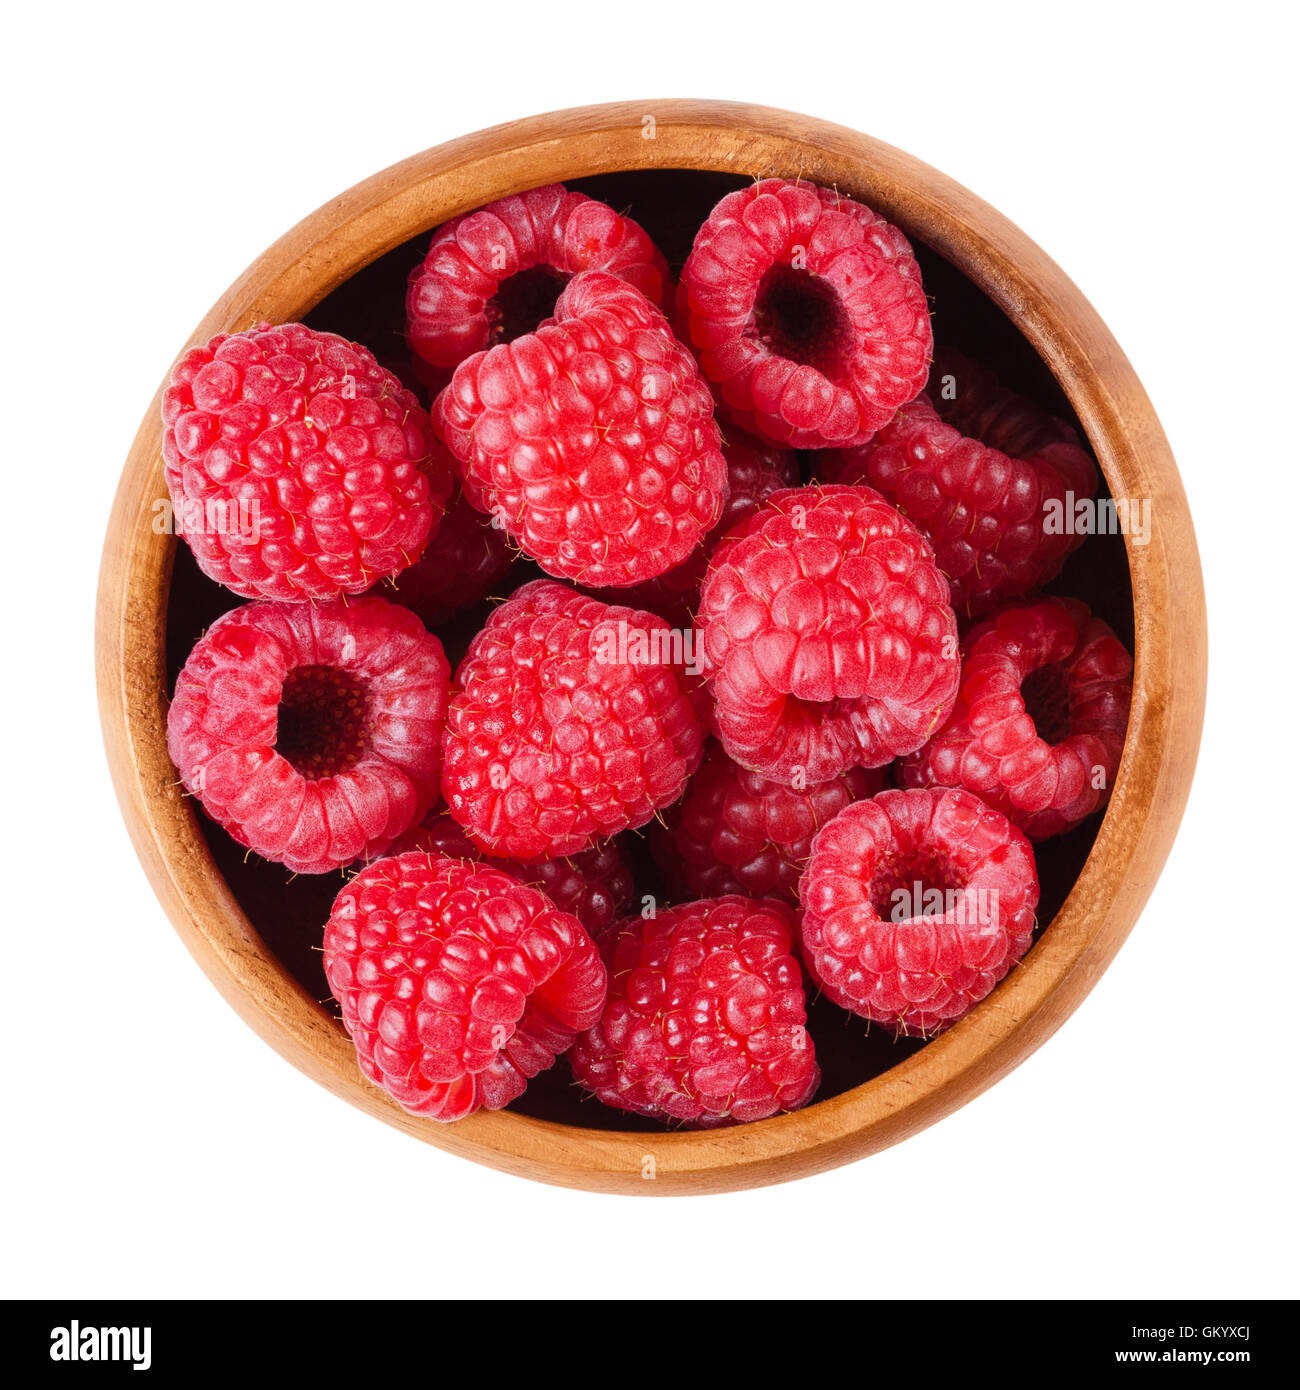 Raspberries in a wooden bowl on white background. Red ripe berries of Rubus species. Edible fruits, raw, organic and vegan food. Stock Photo